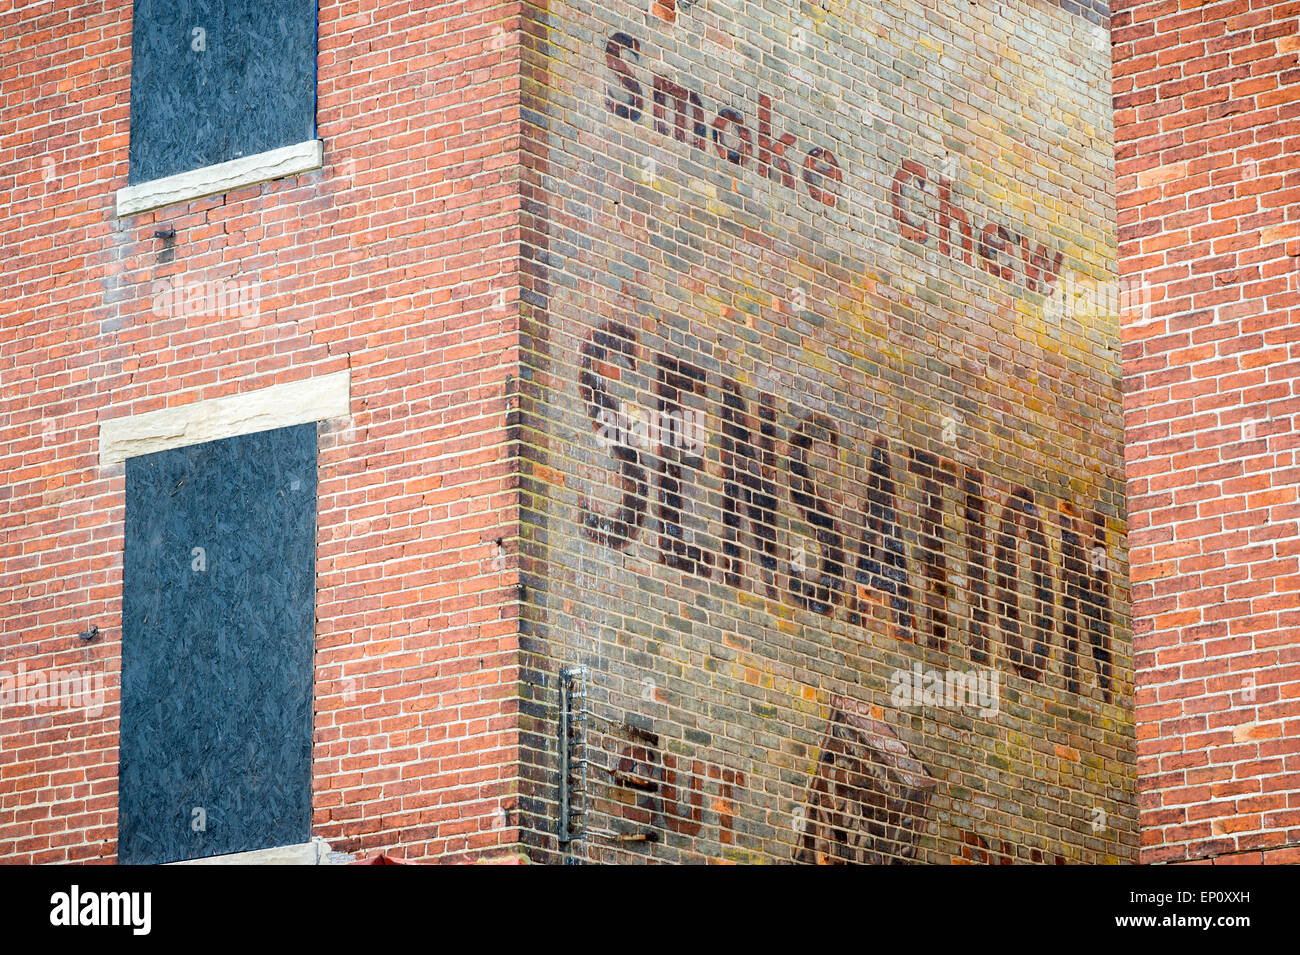 Old cigarette advertisement painted on the side of a brick  building in Cambridge, Maryland Stock Photo